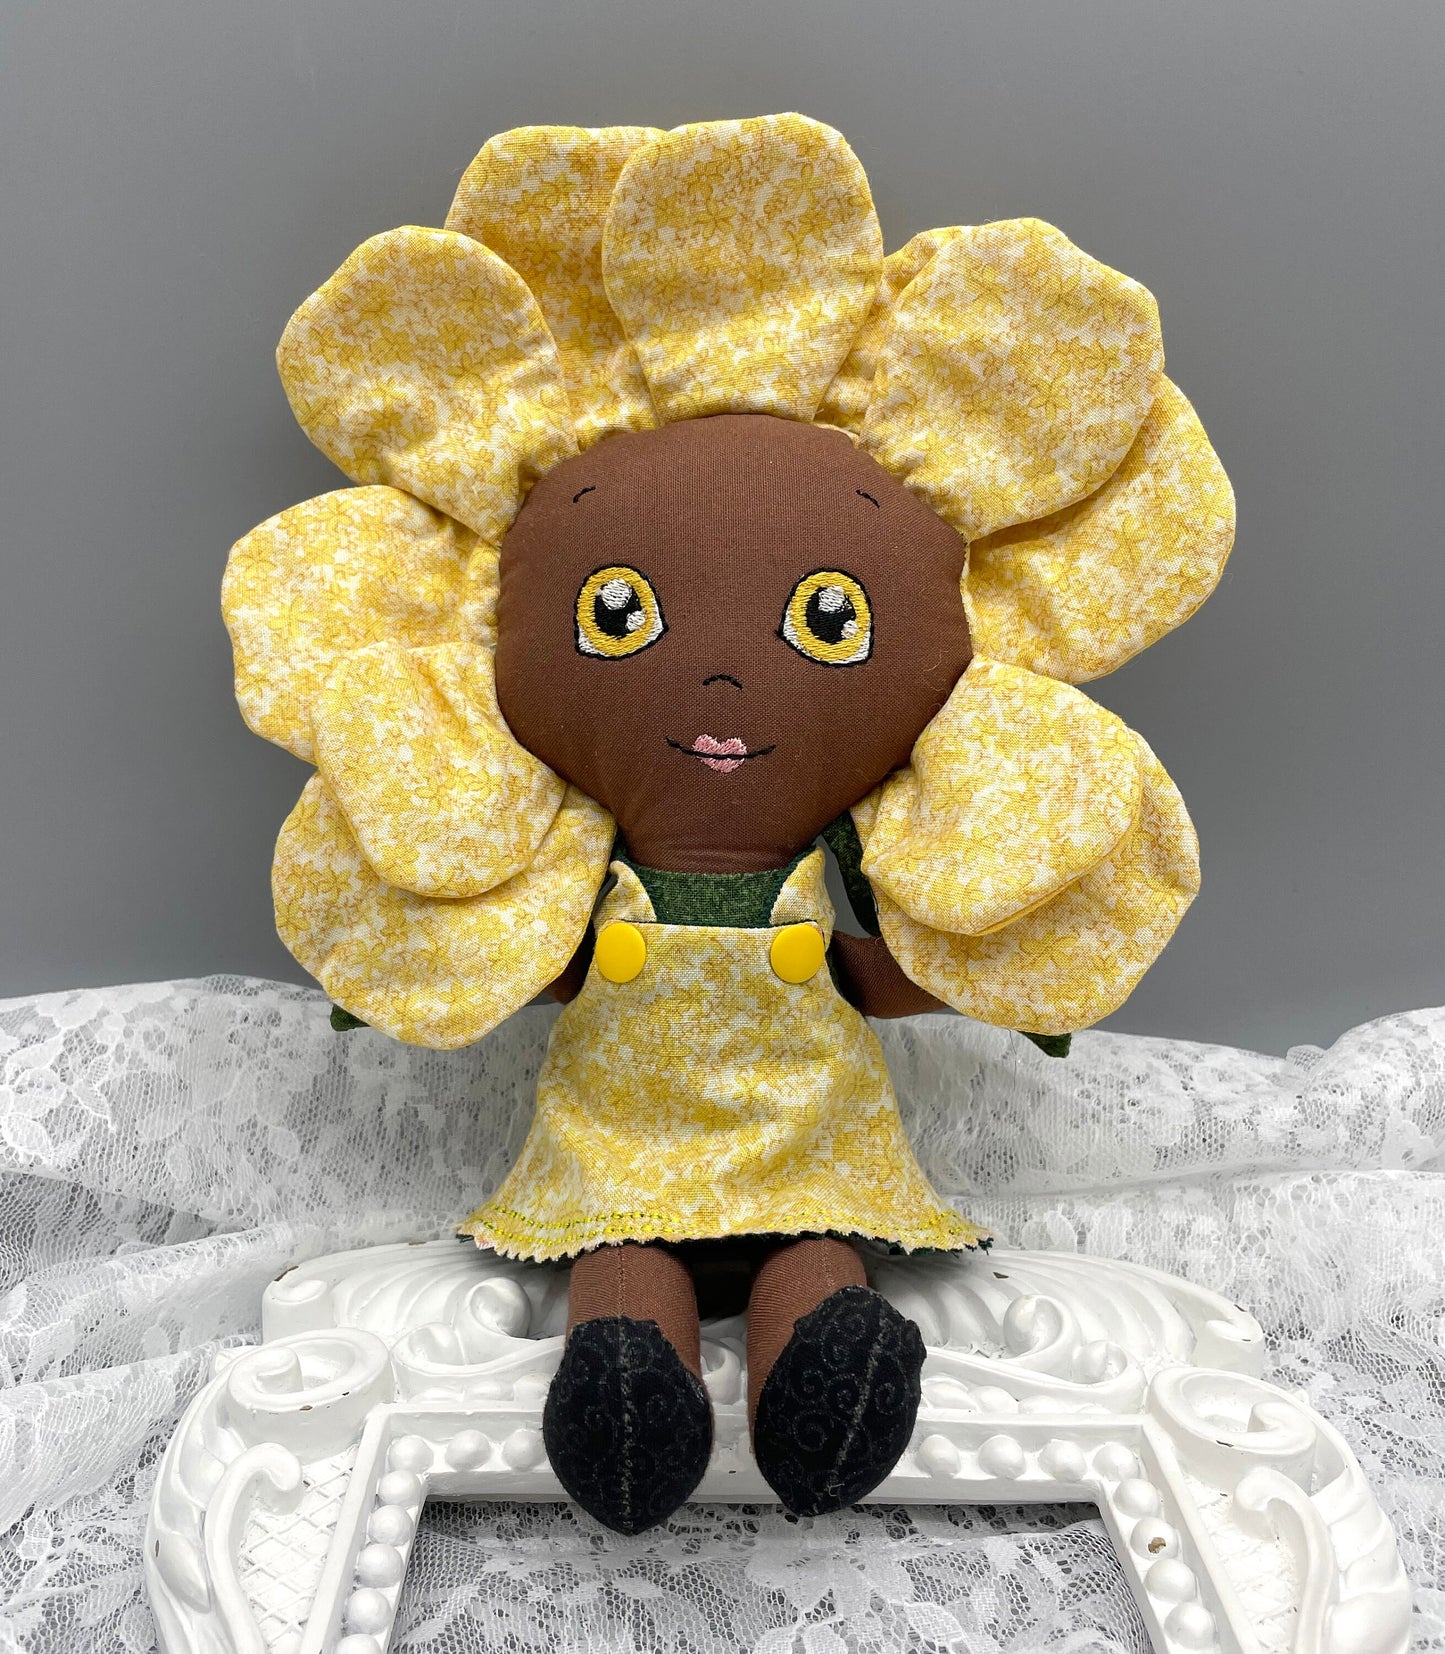 FLOWER DOLL, VALENTINE ROSE doll, Black Doll, Posable petals, Handmade, reversible dress, yellow roses, Unique, black doll, diverse, easter, heirloom doll, gift